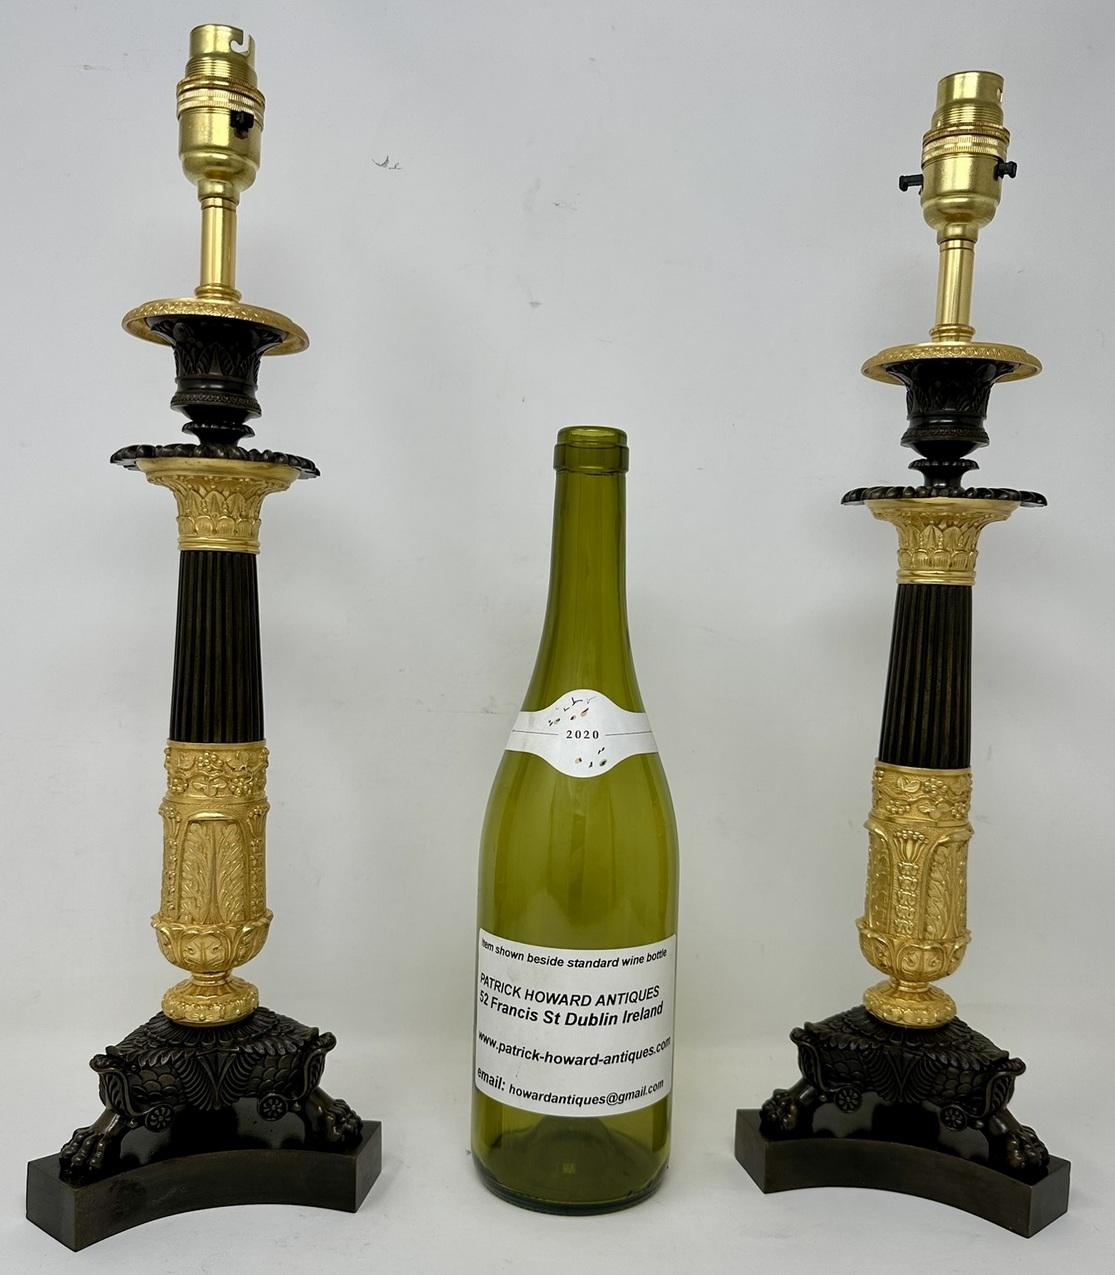 Antique Pair of French Doré Bronze Neoclassical Ormolu Gilt Candlesticks Lamps  For Sale 7